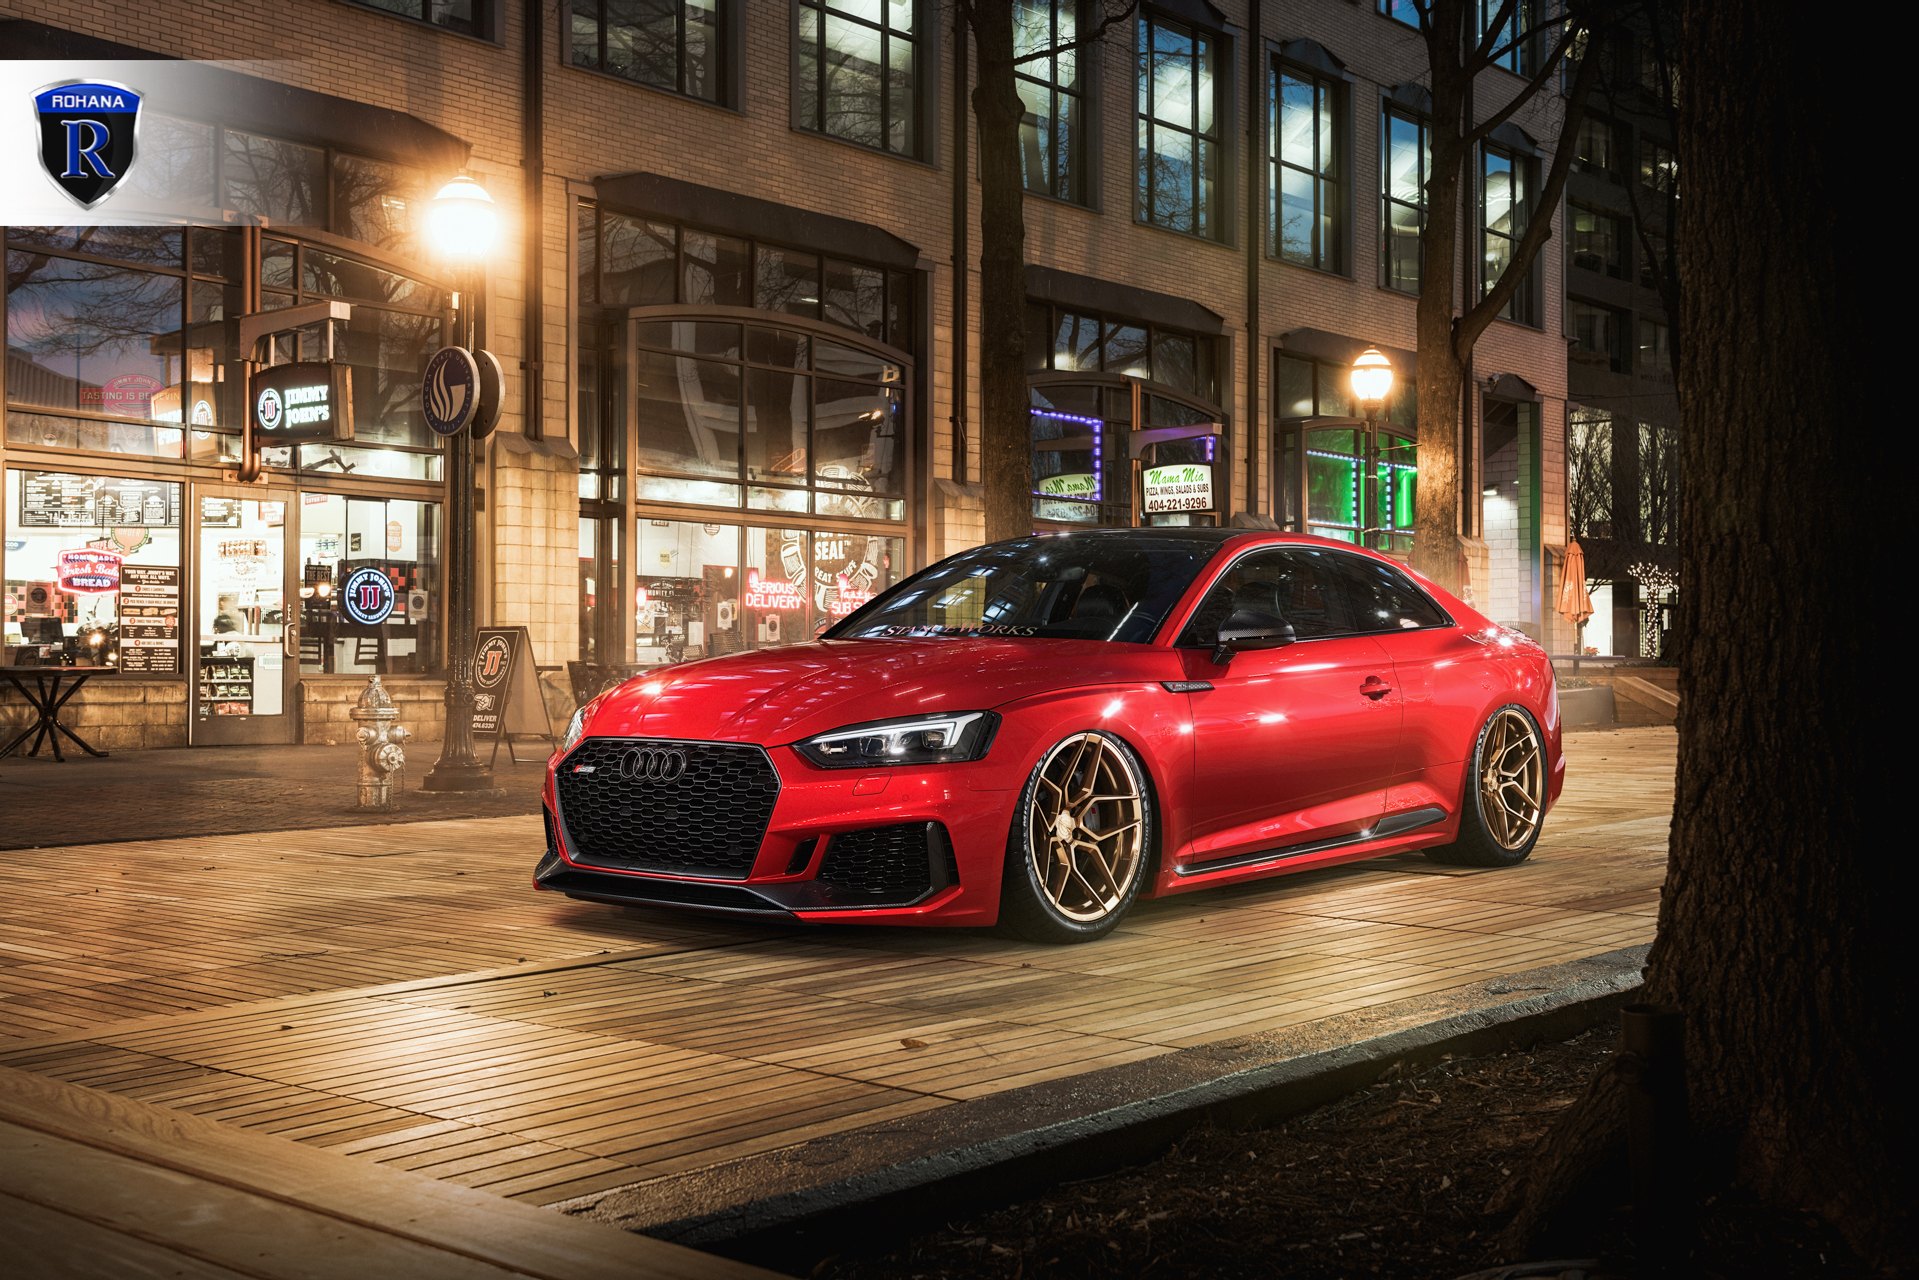 Aftermarket LED-Bar Style Headlights on Red Audi S5 - Photo by Rohana Wheels